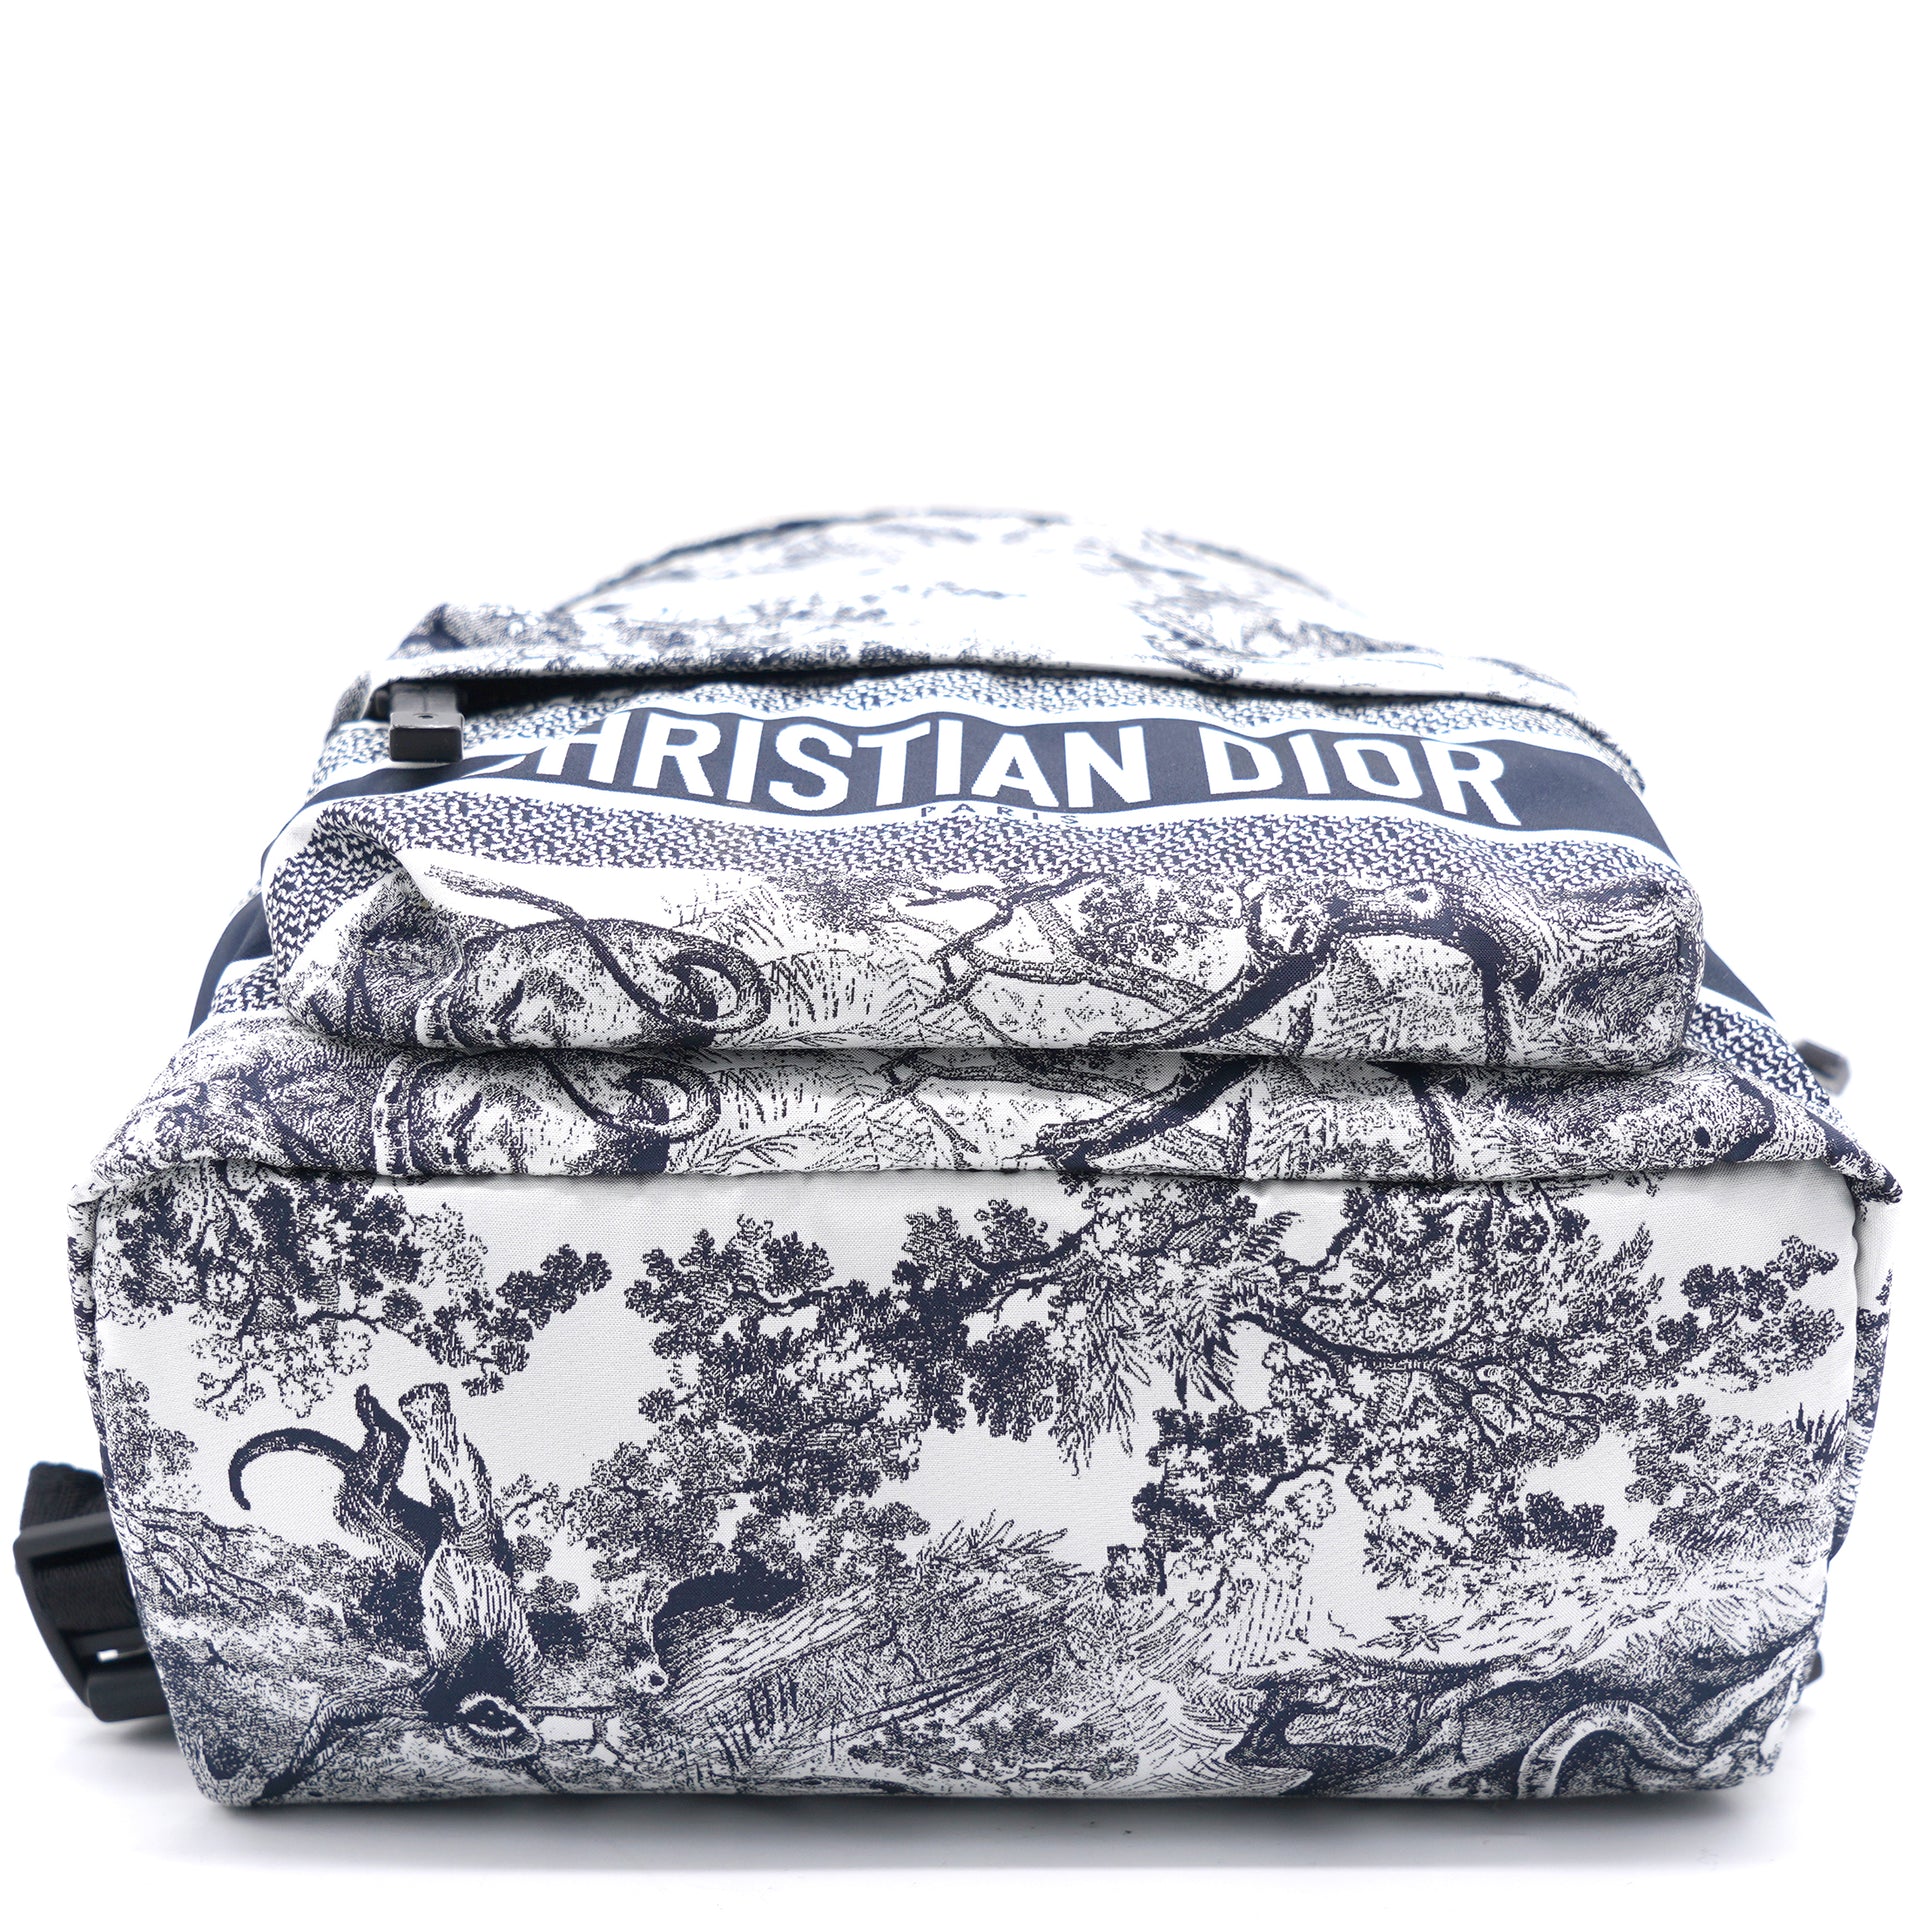 Small Diortravel Backpack Blue Toile De Jouy Reverse Technical Fabric